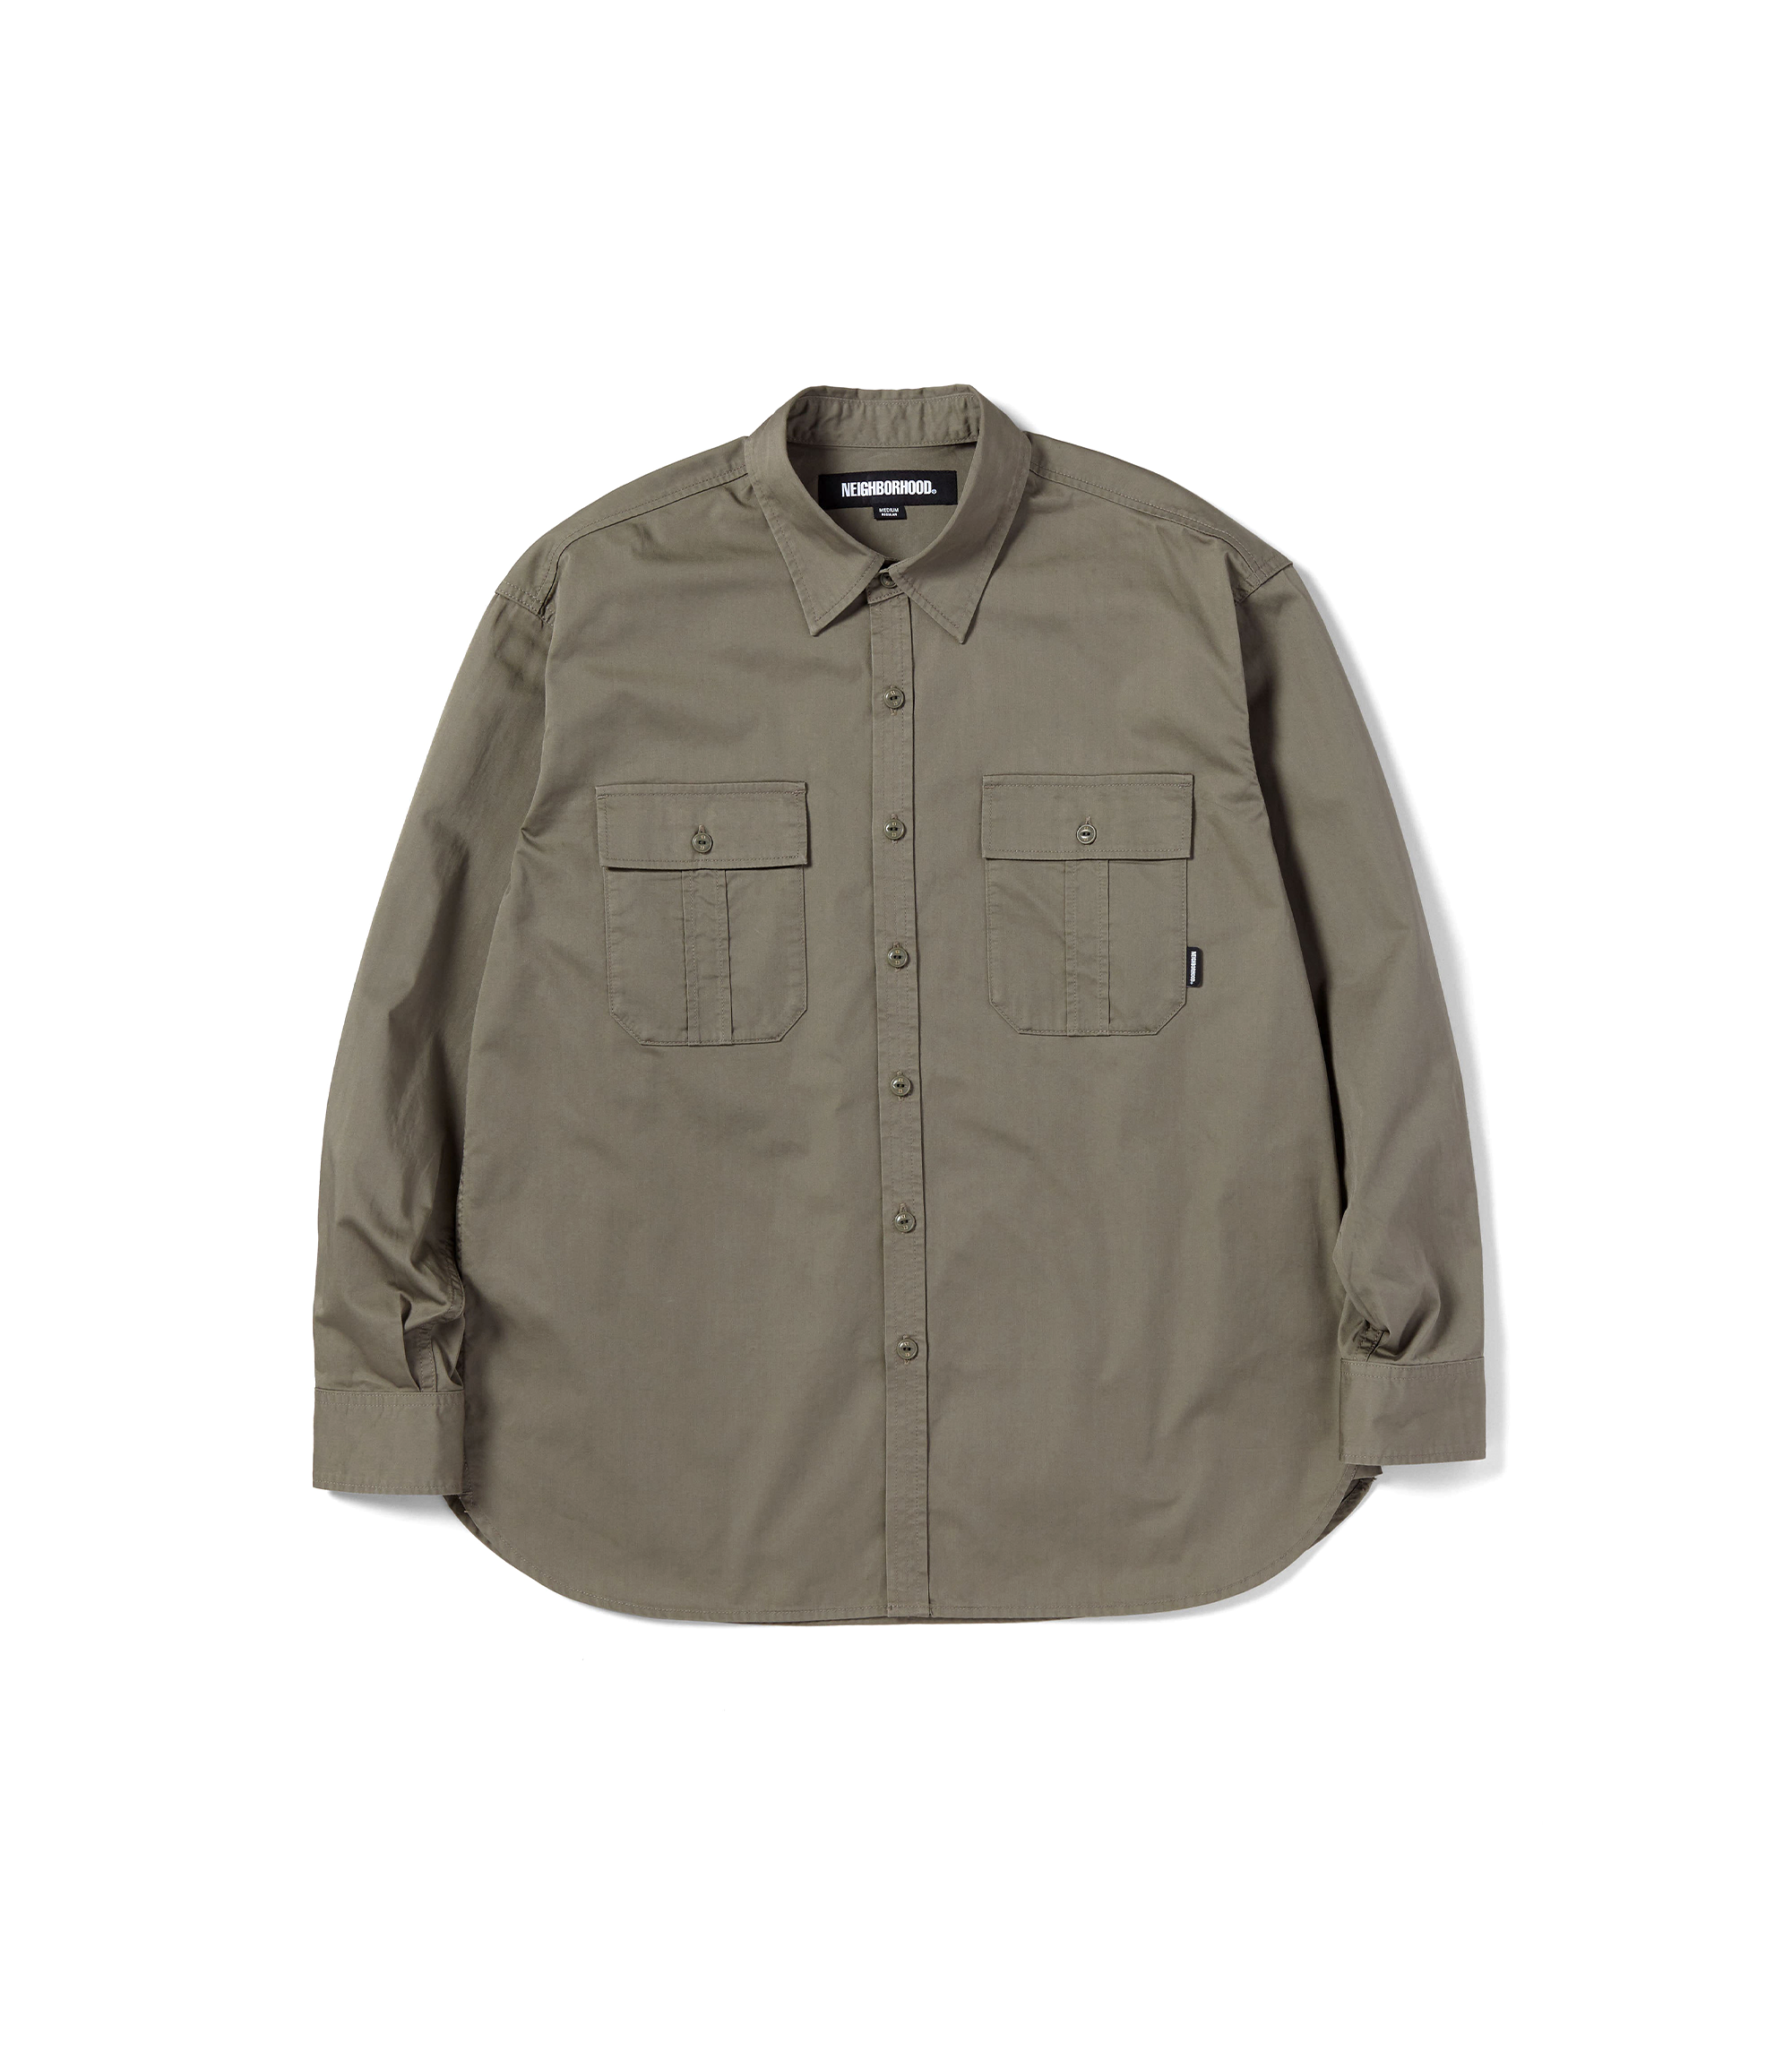 Officers L/S Shirt - Olive Drab